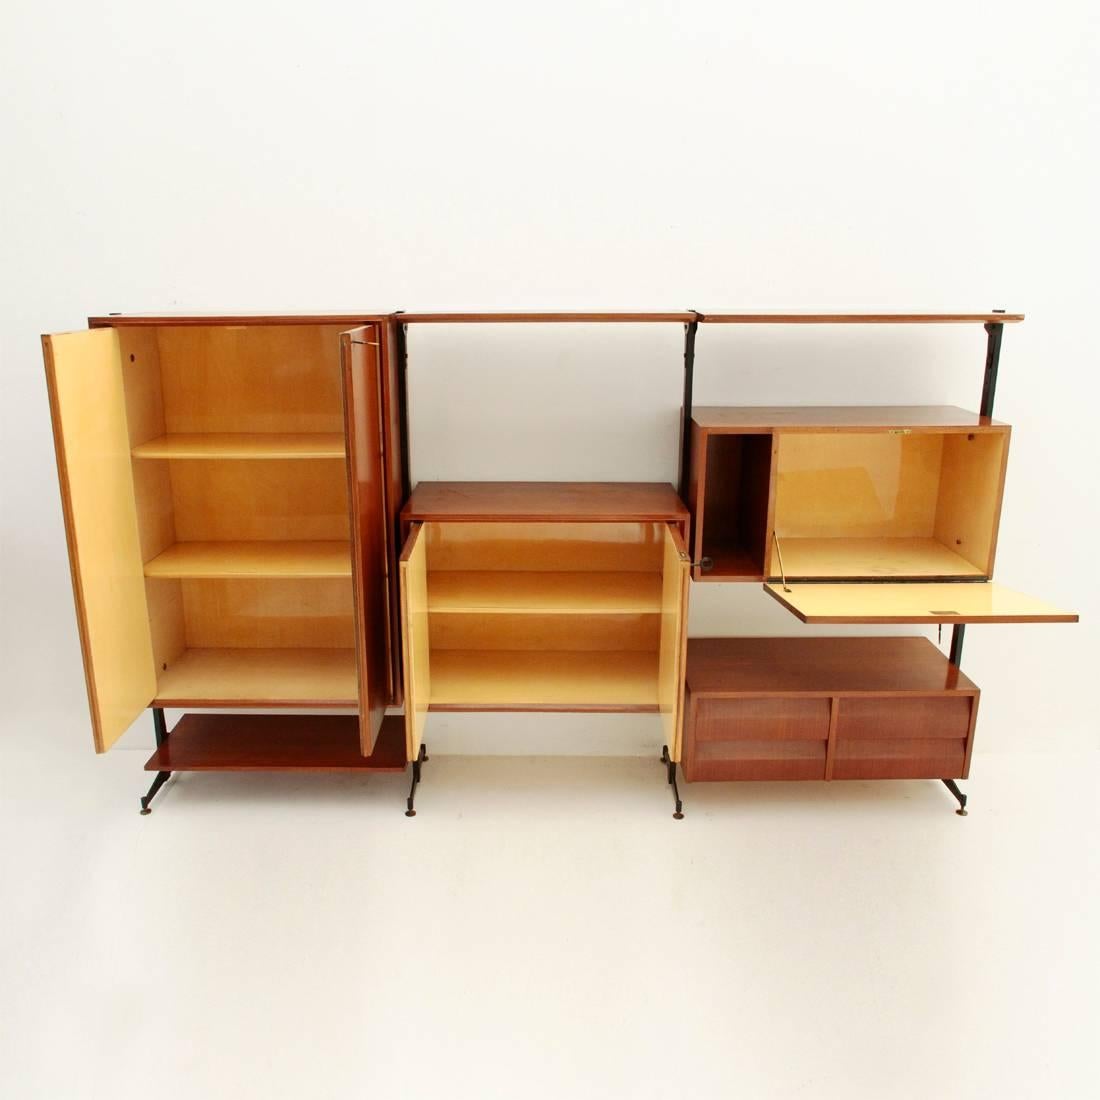 Mid-20th Century Italian Wall Unit with Metal Uprights